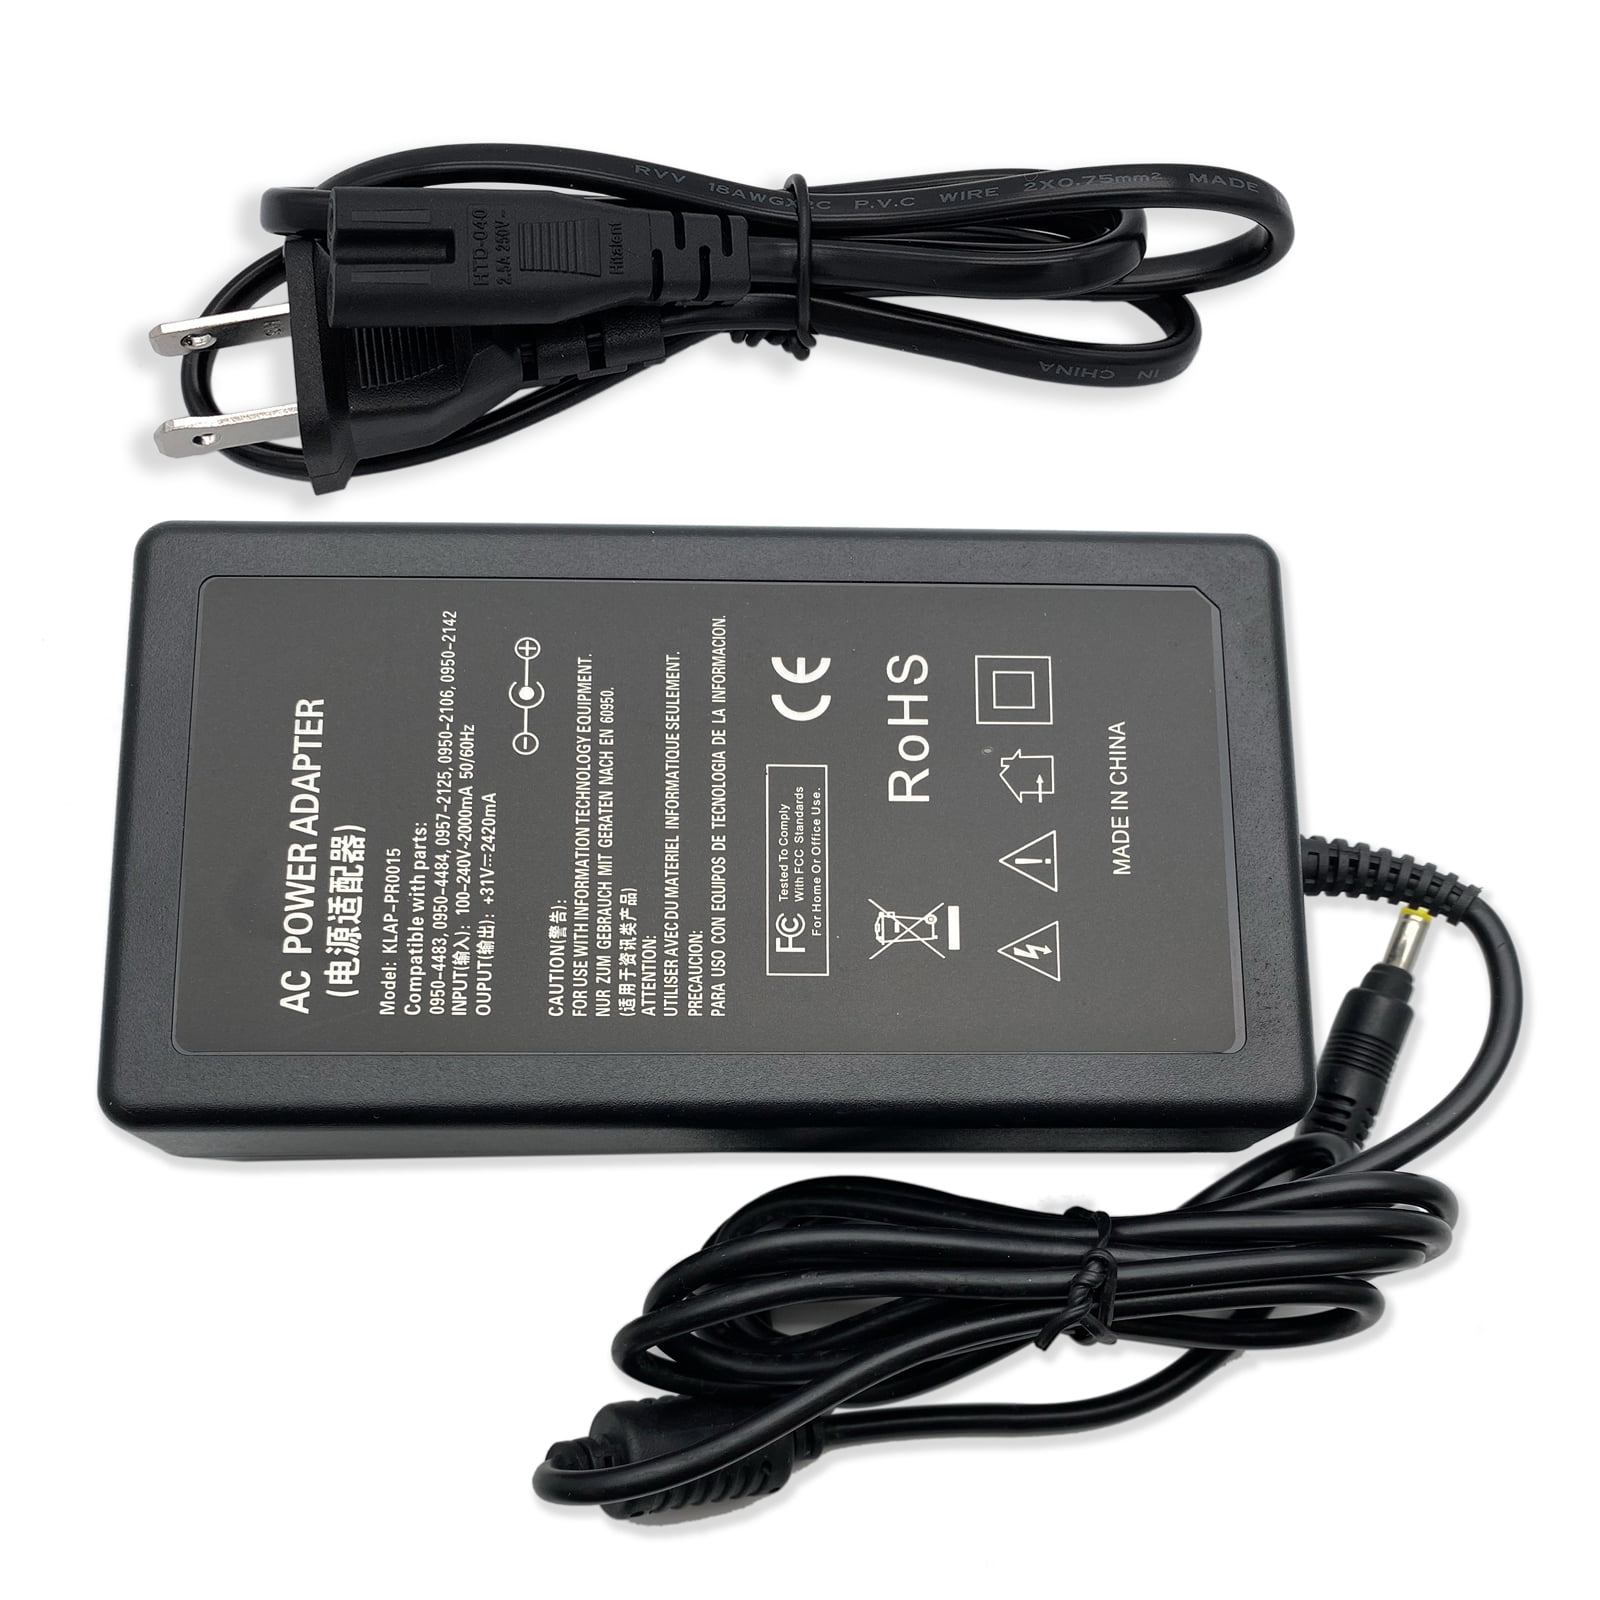 HP PhotoSmart 2600 2610 2610v printer power supply ac adapter cord cable charger 